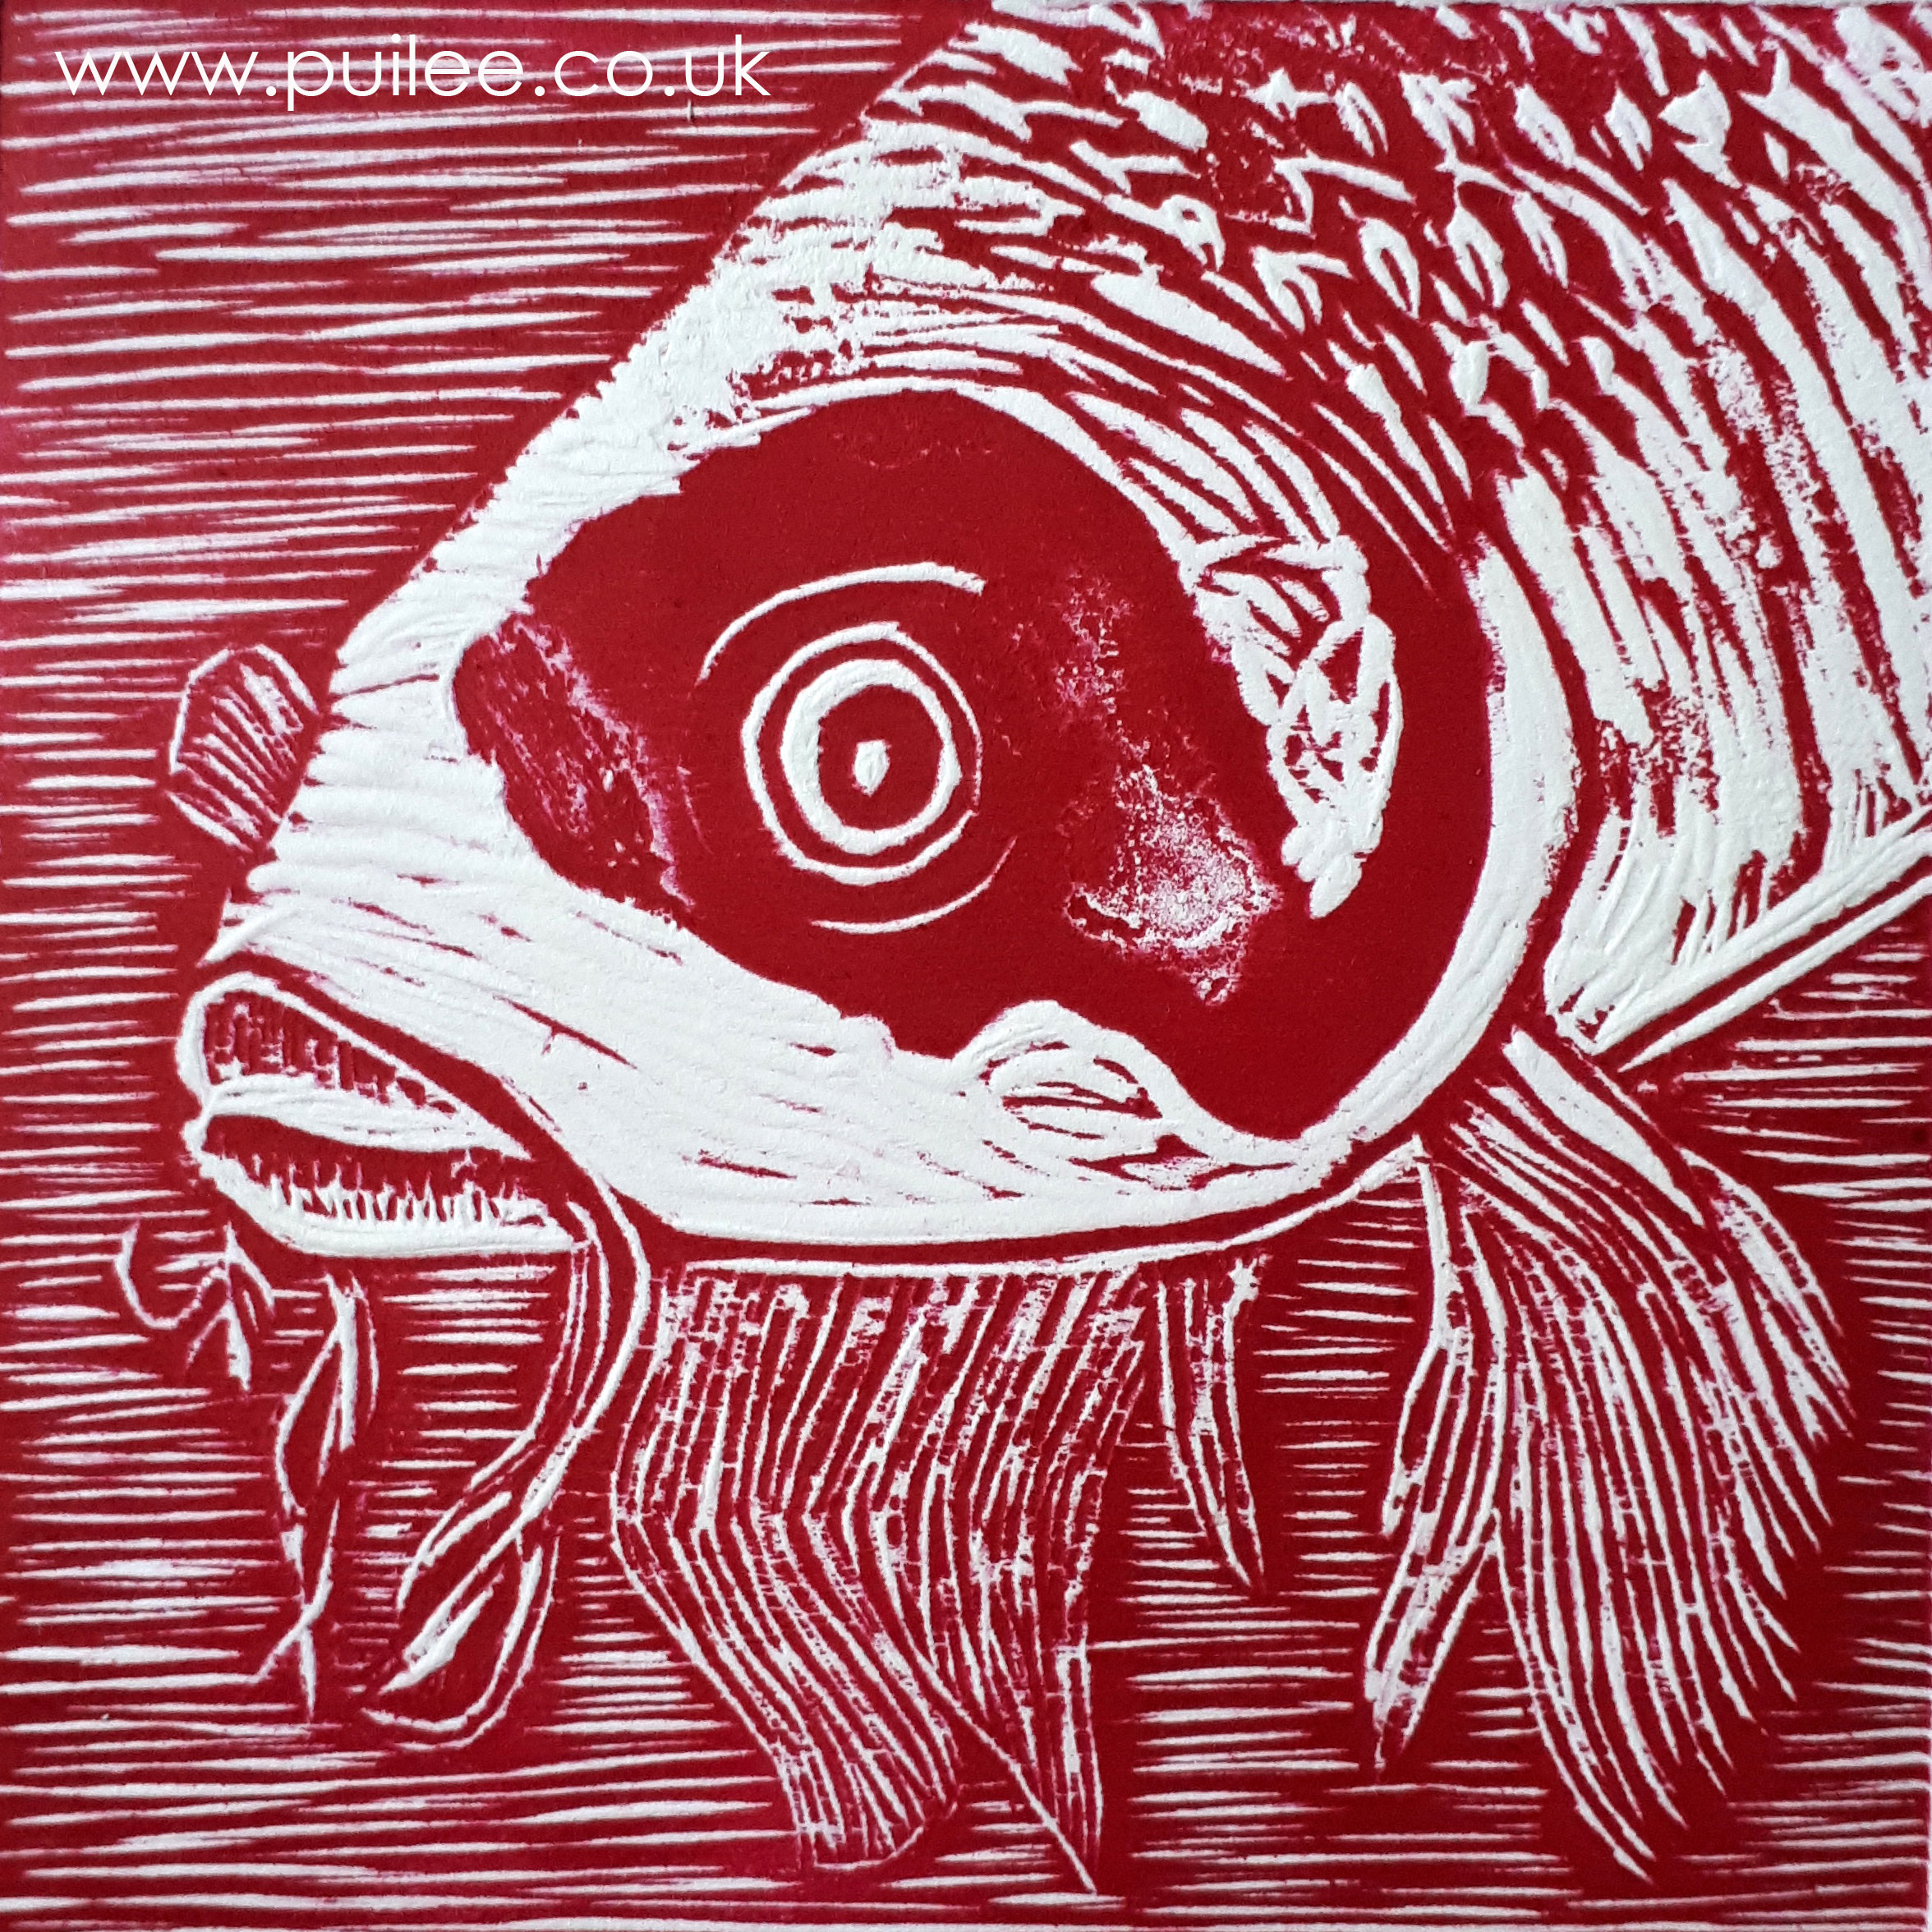 Coy (2018) woodcut on Fabriano - Pui Lee